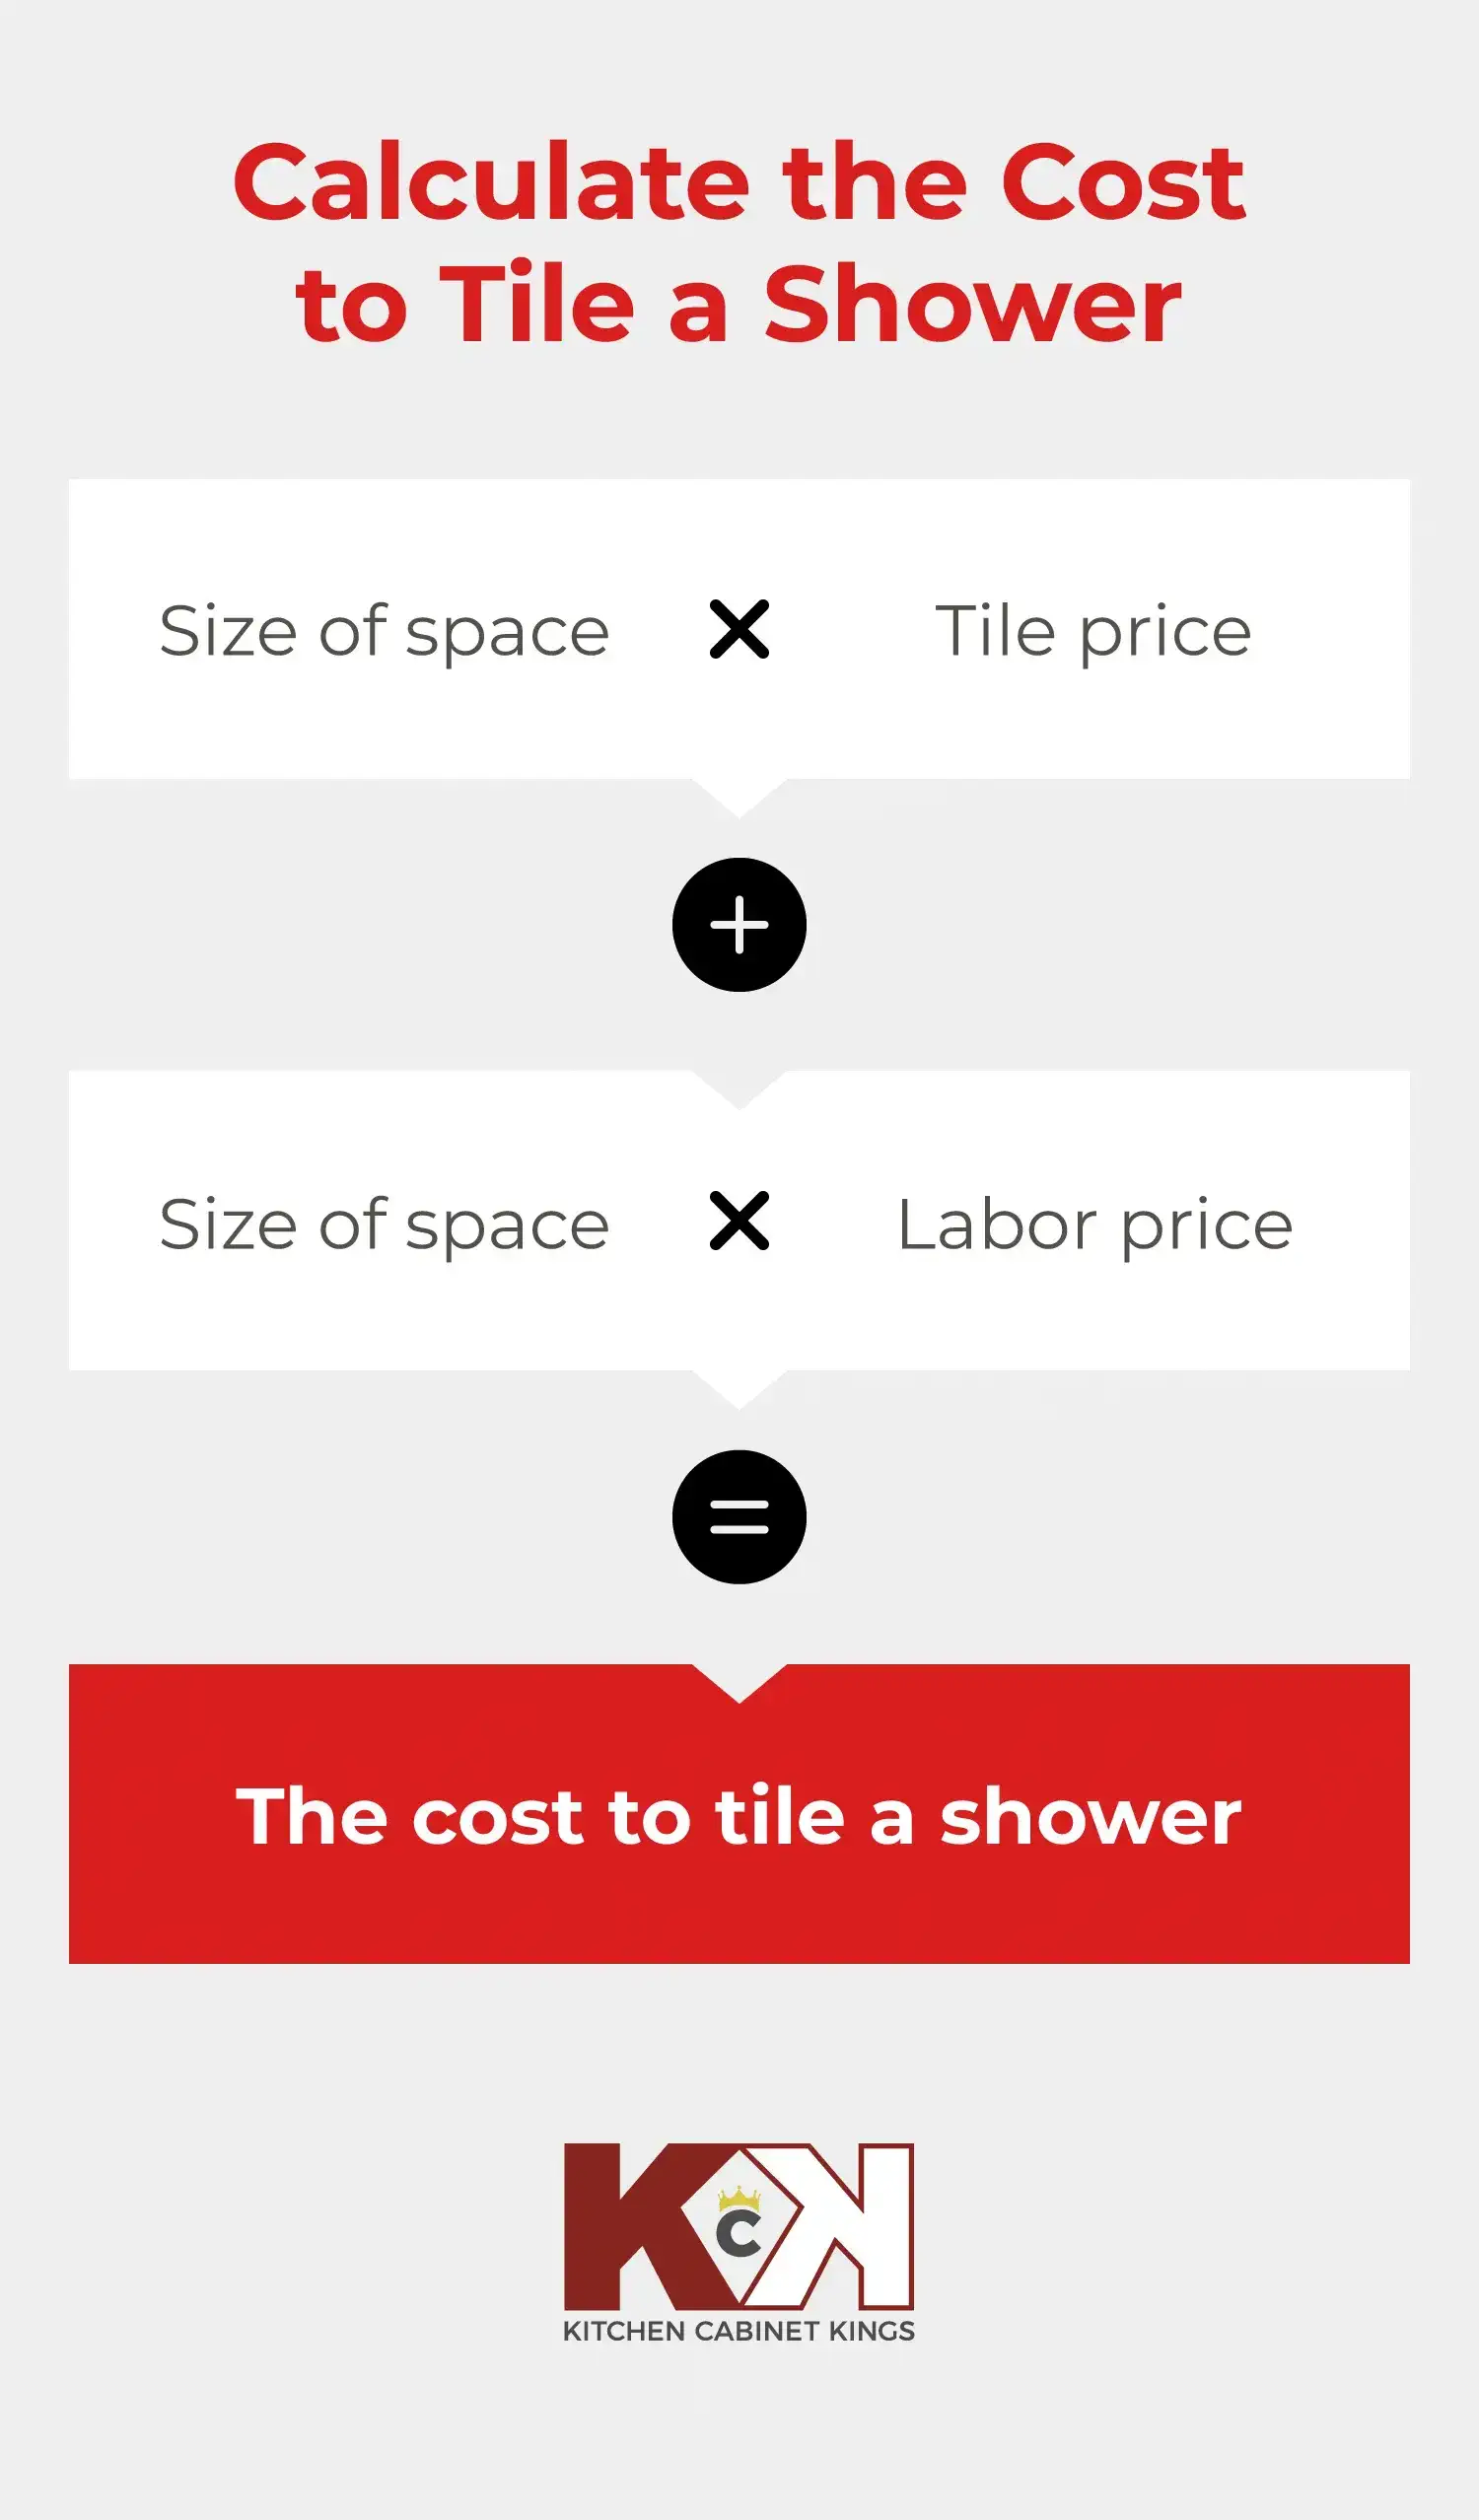 How to calculate the cost to tile a shower.